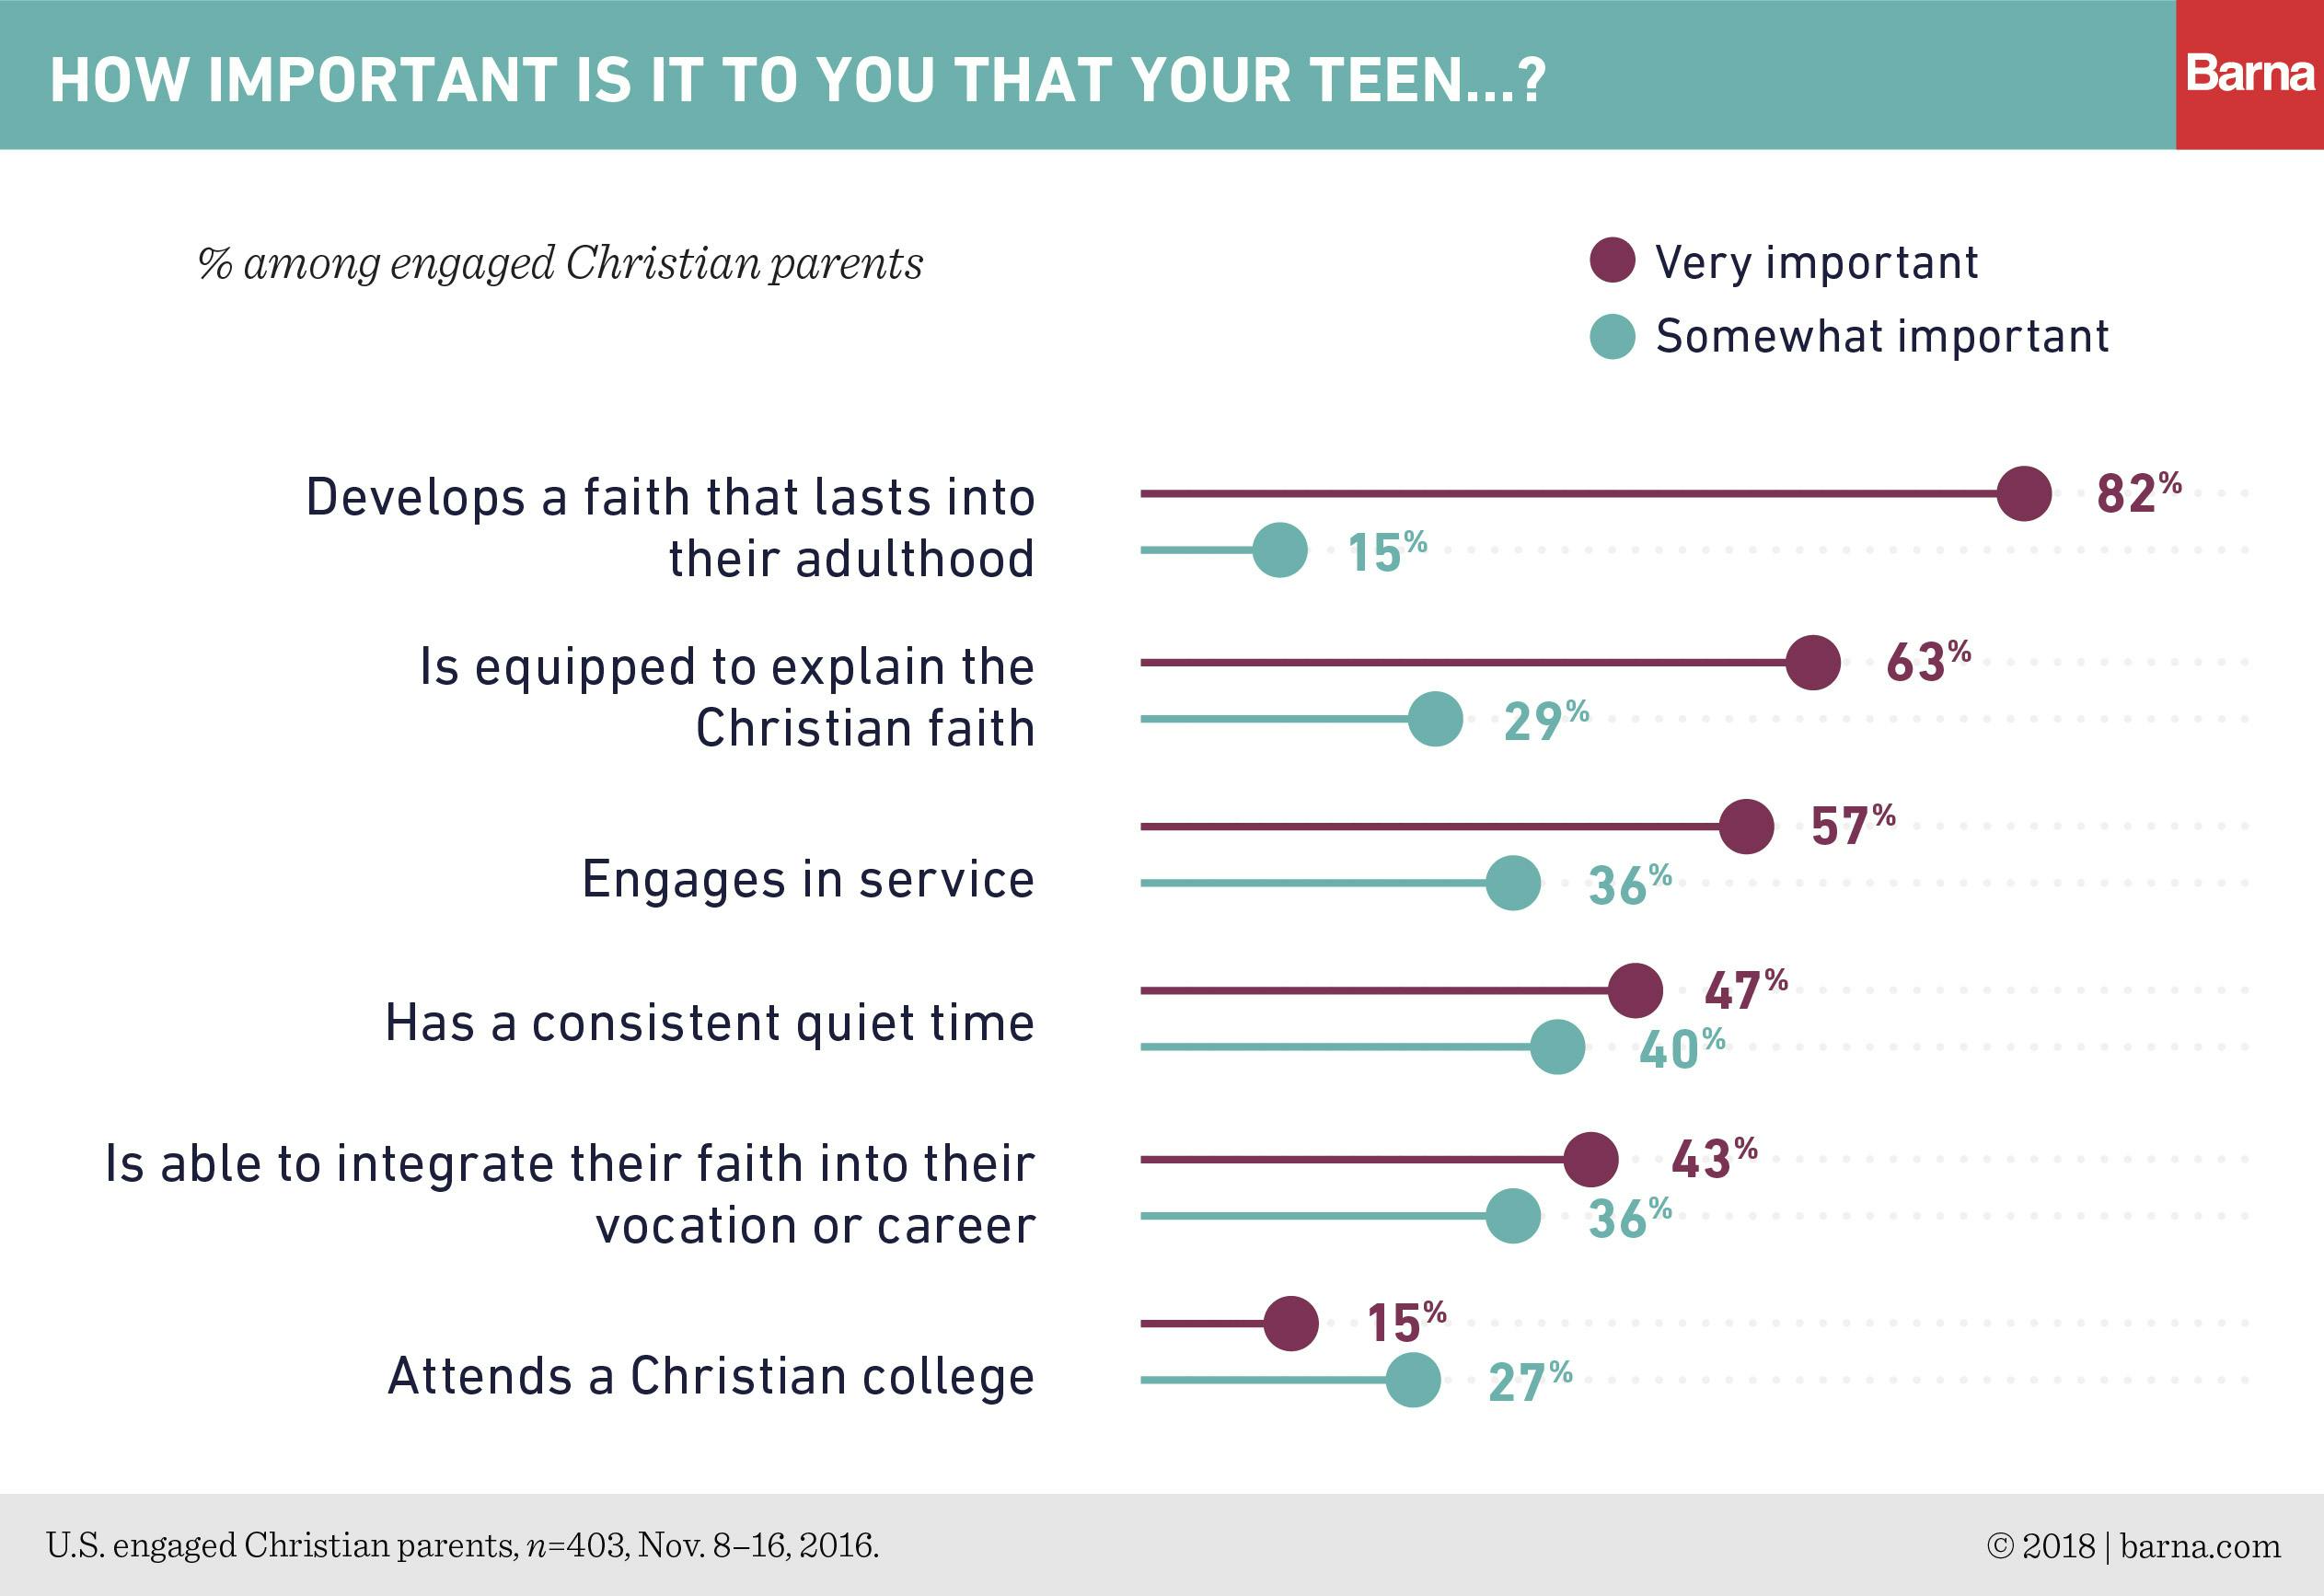 Parents want teens to develop a faith that lasts